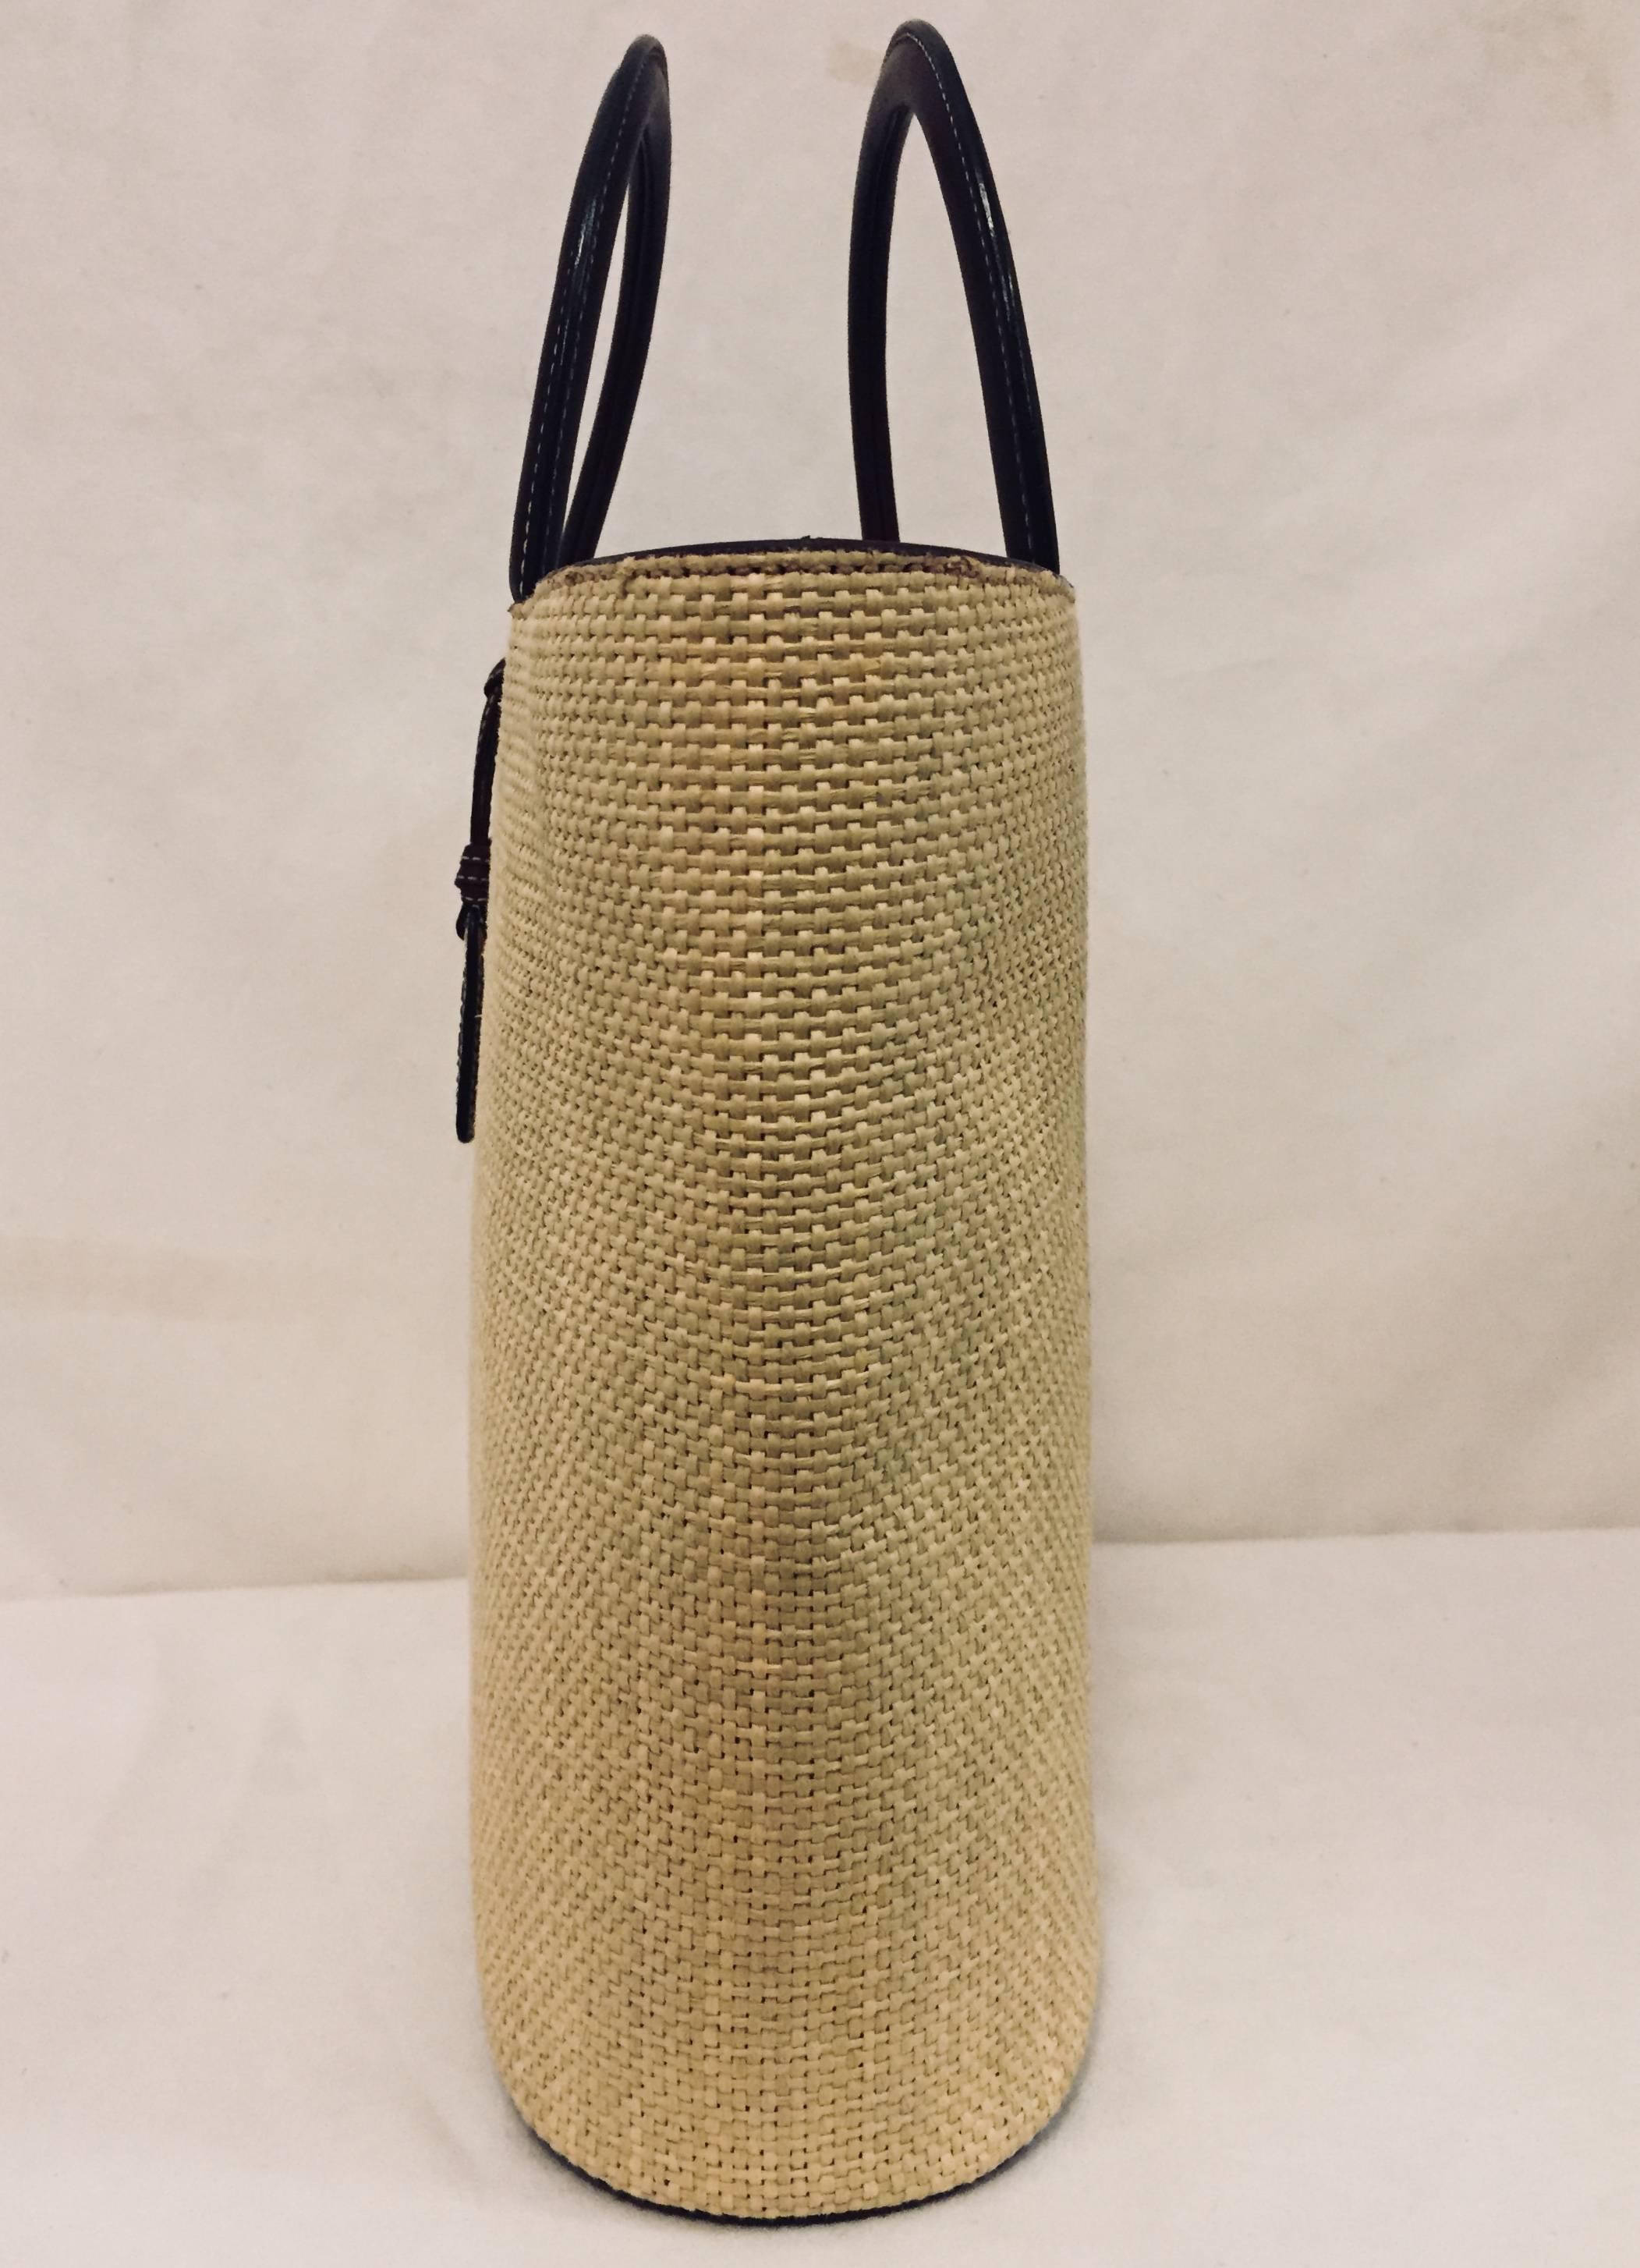 straw tote with leather handles